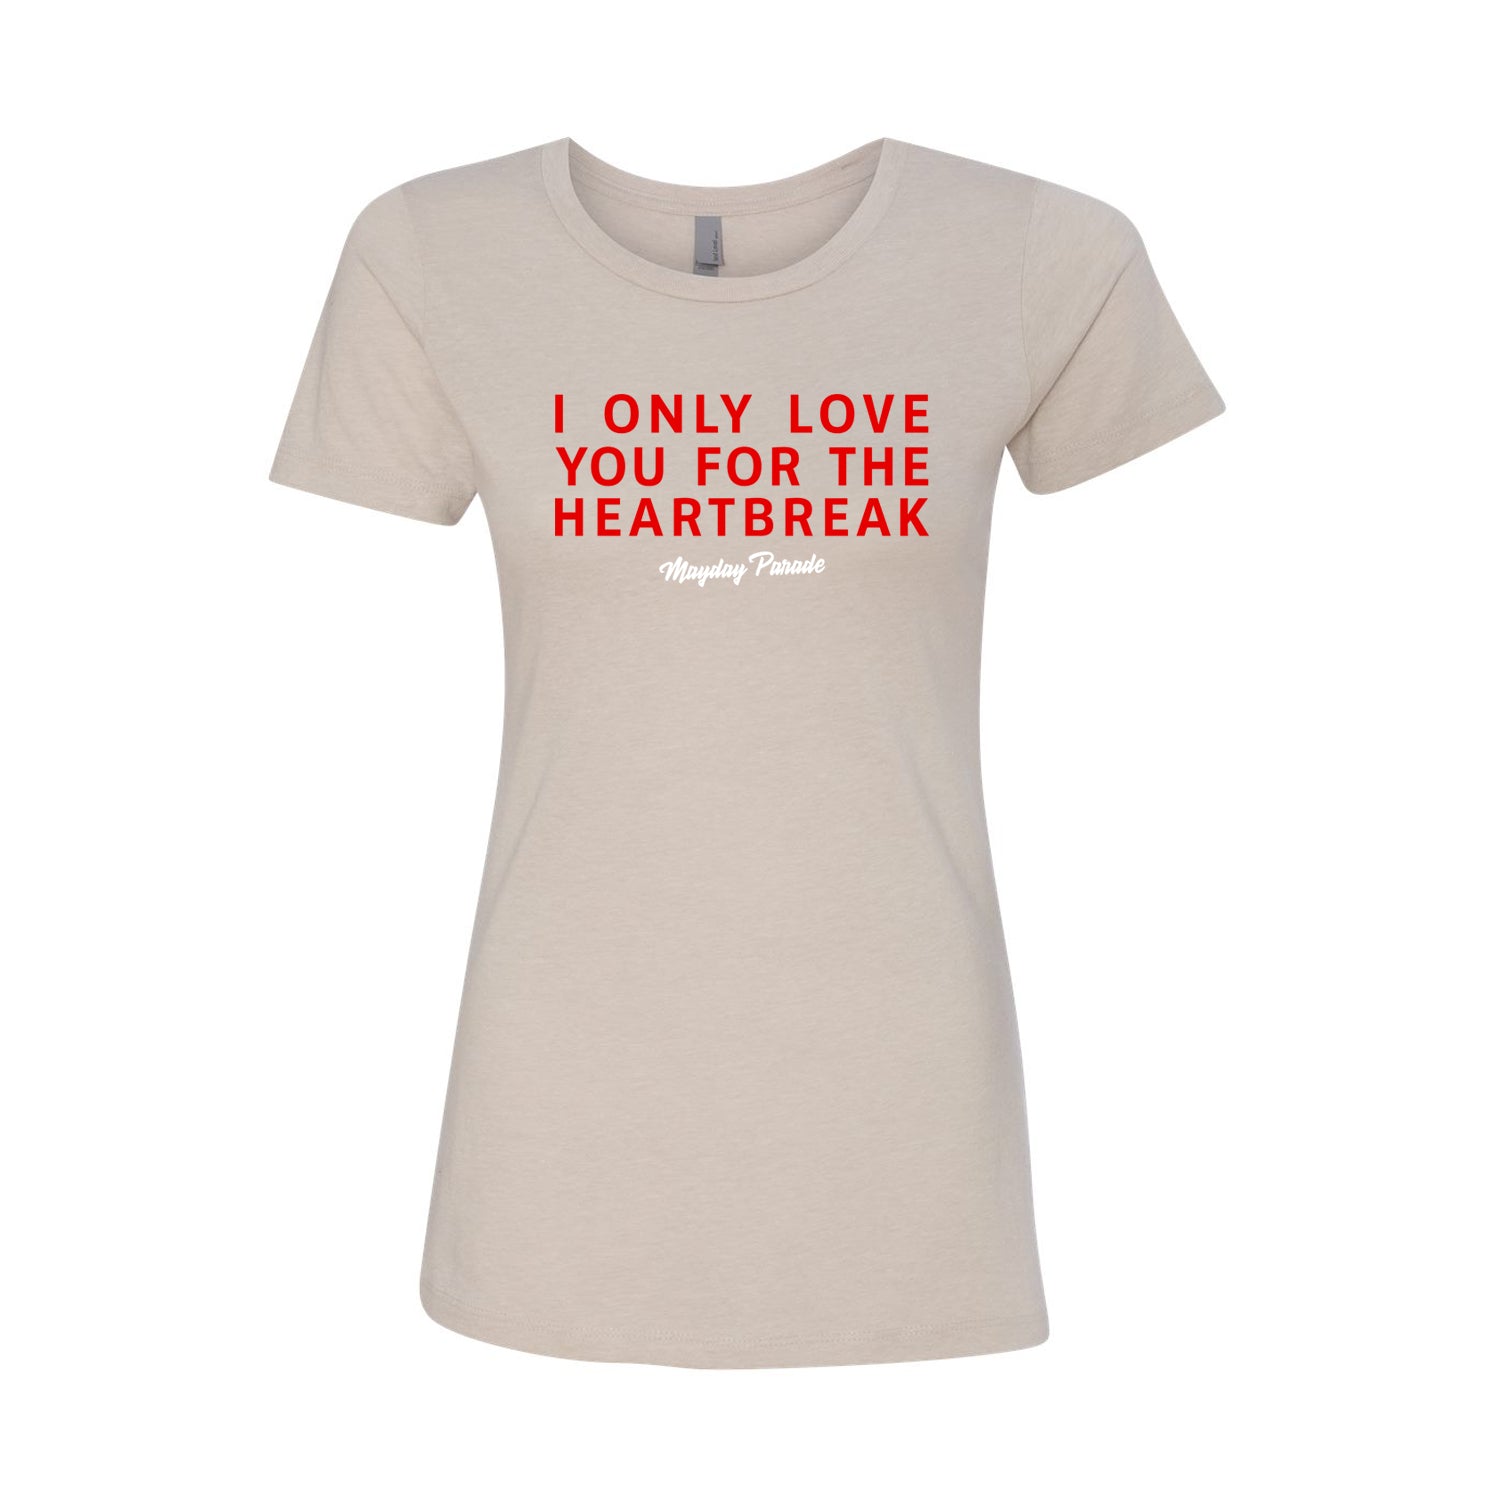 image of a women's sand colored tee shirt on a white background. red text across the chest that says i only love you for the heartbreak, with white cursive text below that says mayday parade